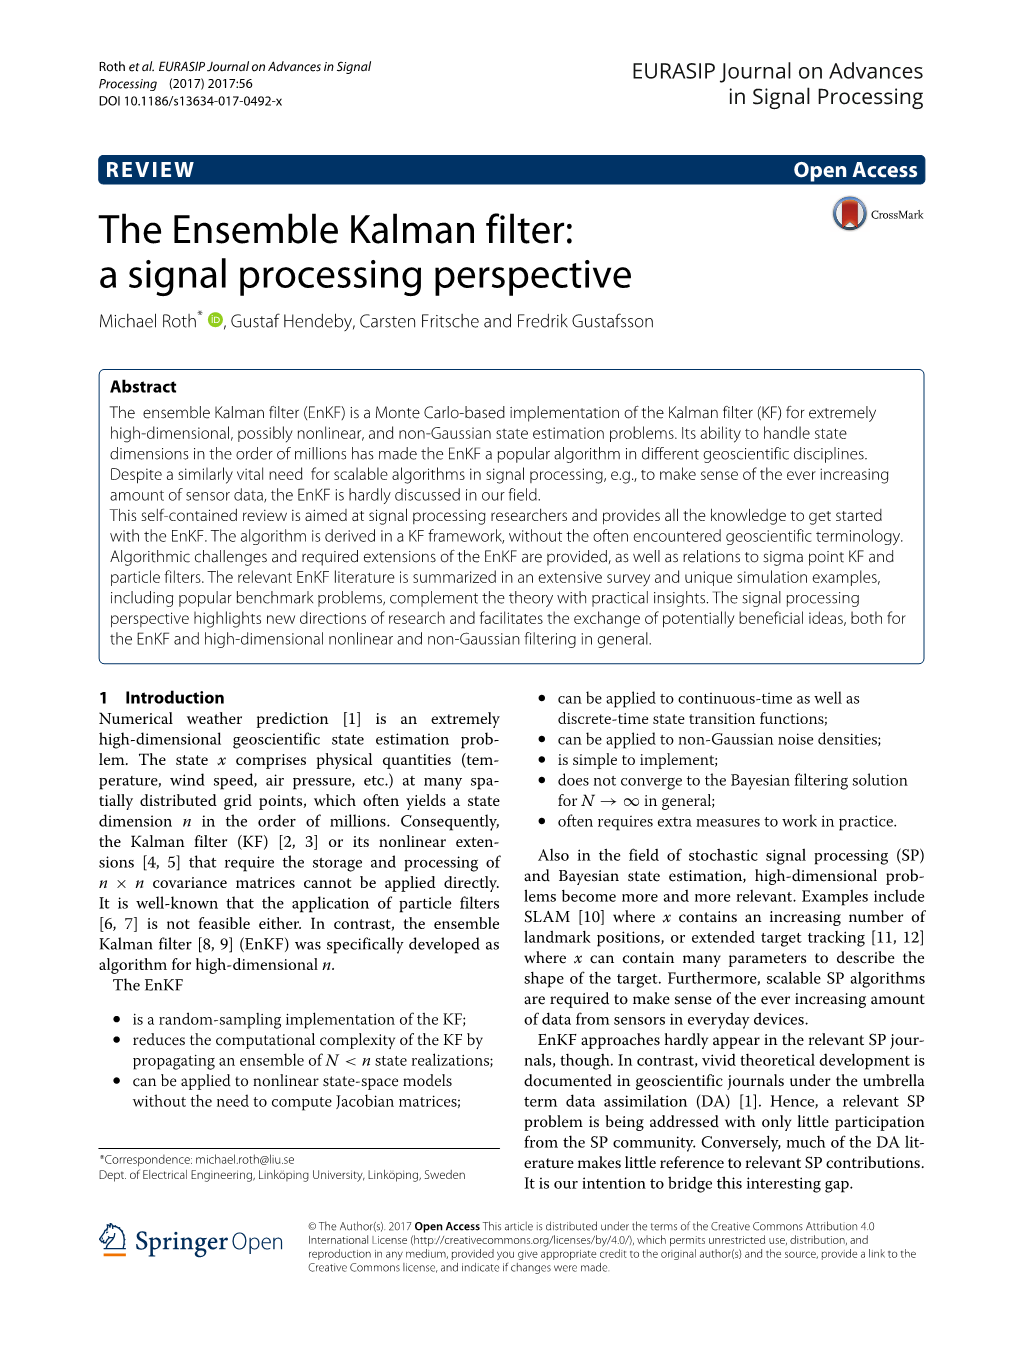 The Ensemble Kalman Filter: a Signal Processing Perspective Michael Roth* , Gustaf Hendeby, Carsten Fritsche and Fredrik Gustafsson